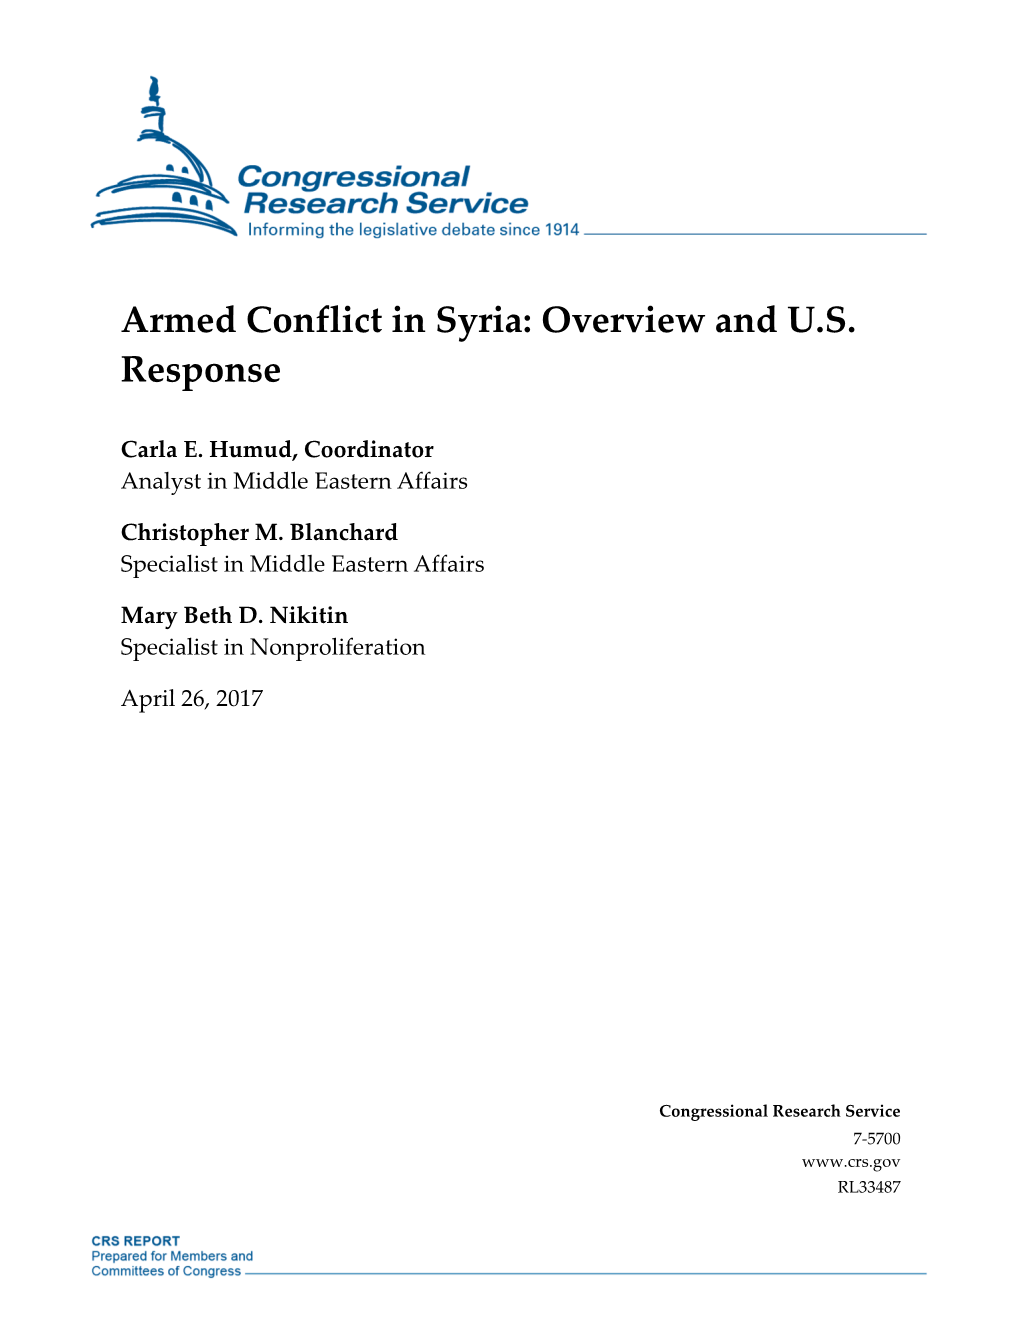 Armed Conflict in Syria: Overview and U.S